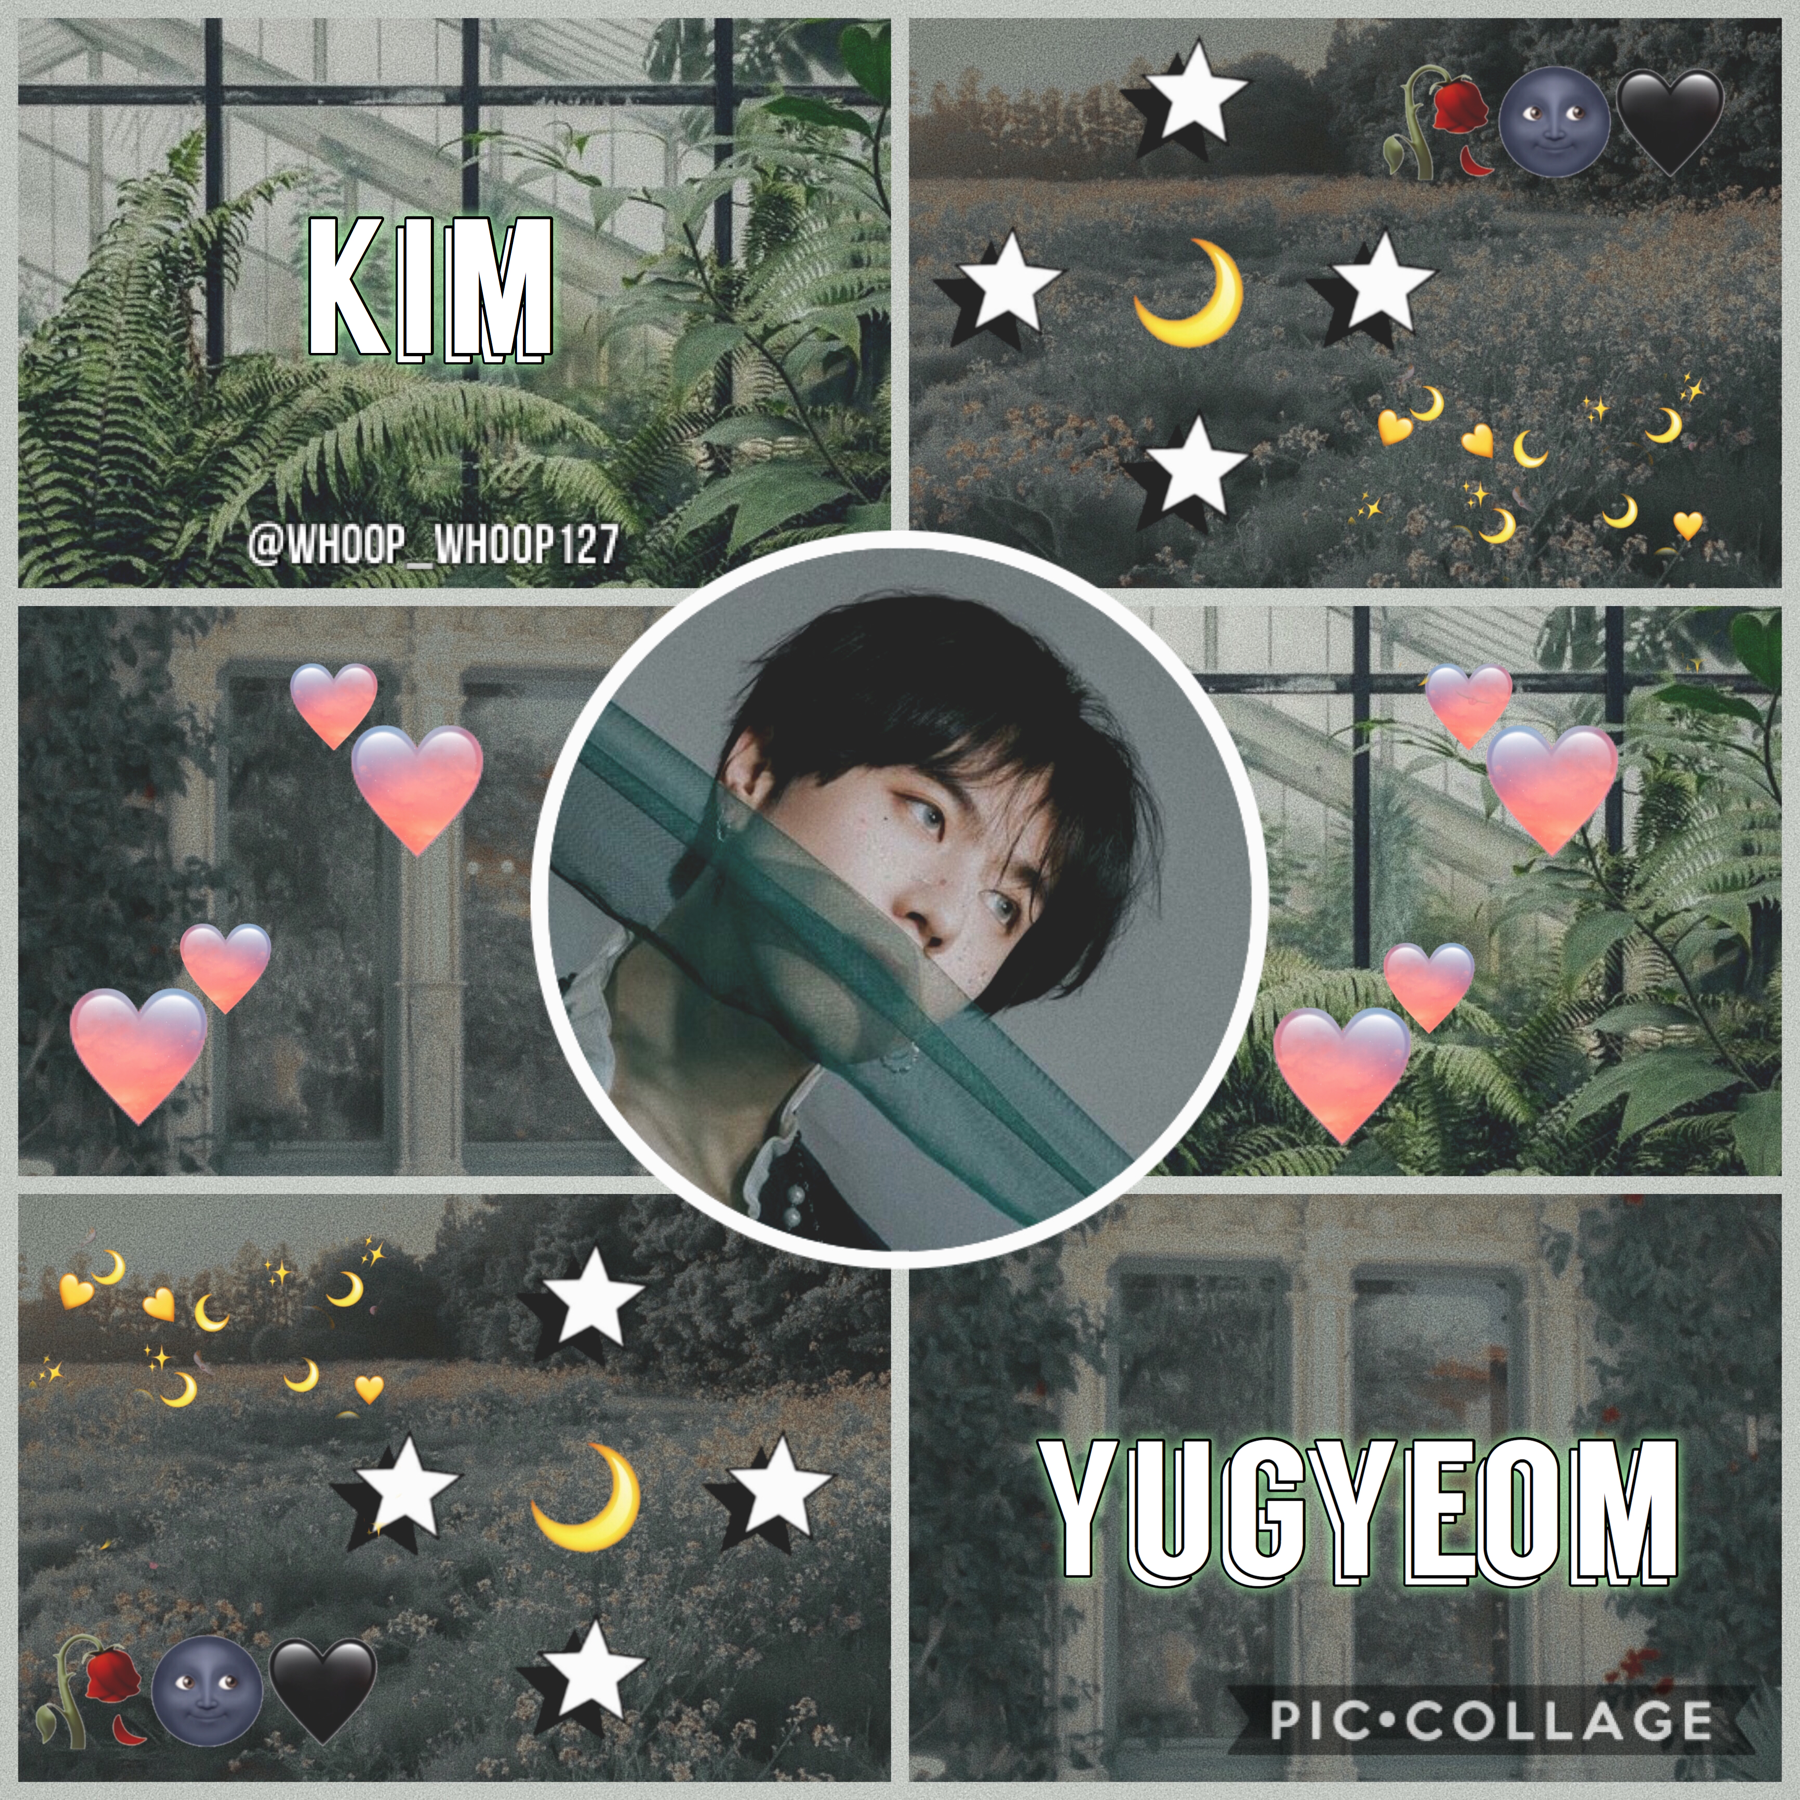 •🚒•
🌷Yugyeom~GOT7🌷
Not By the Moon is SUCH A BOP I CANT EVENNNNN😩✊✊! Btw Ramadan Mubarak to those who celebrate~ I’m fasting and my sleep schedule is wAcK😂 ❤️❤️